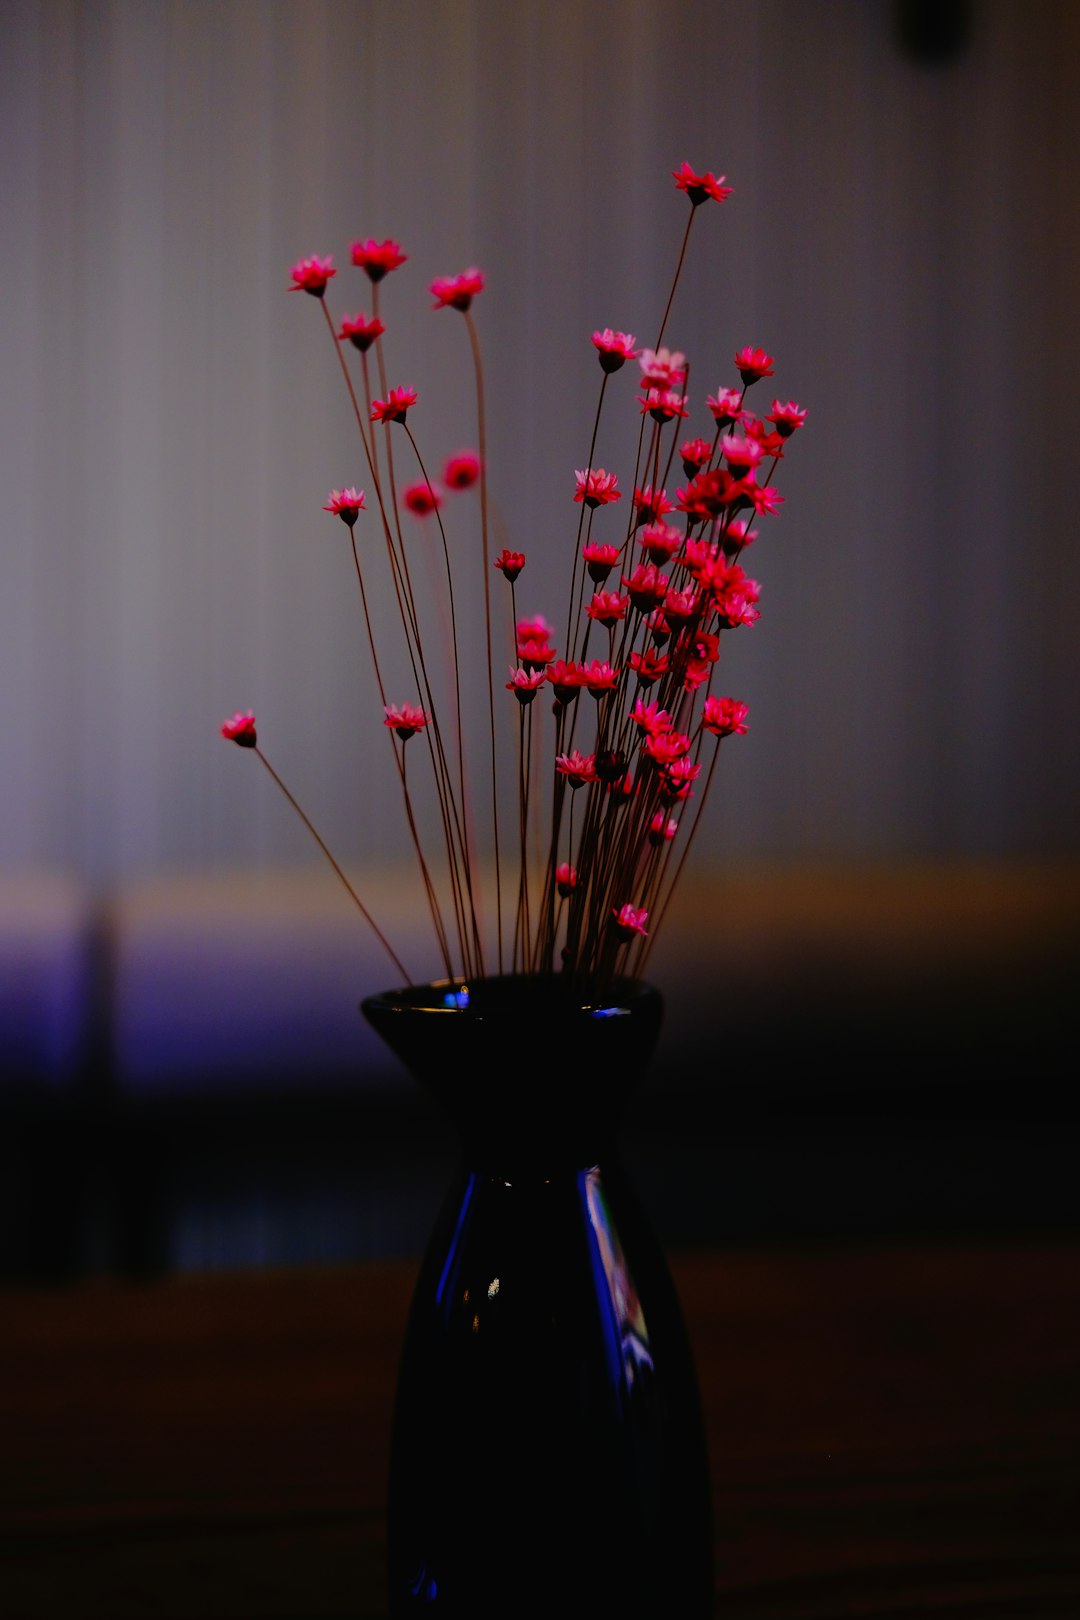 red and white flower on blue glass vase